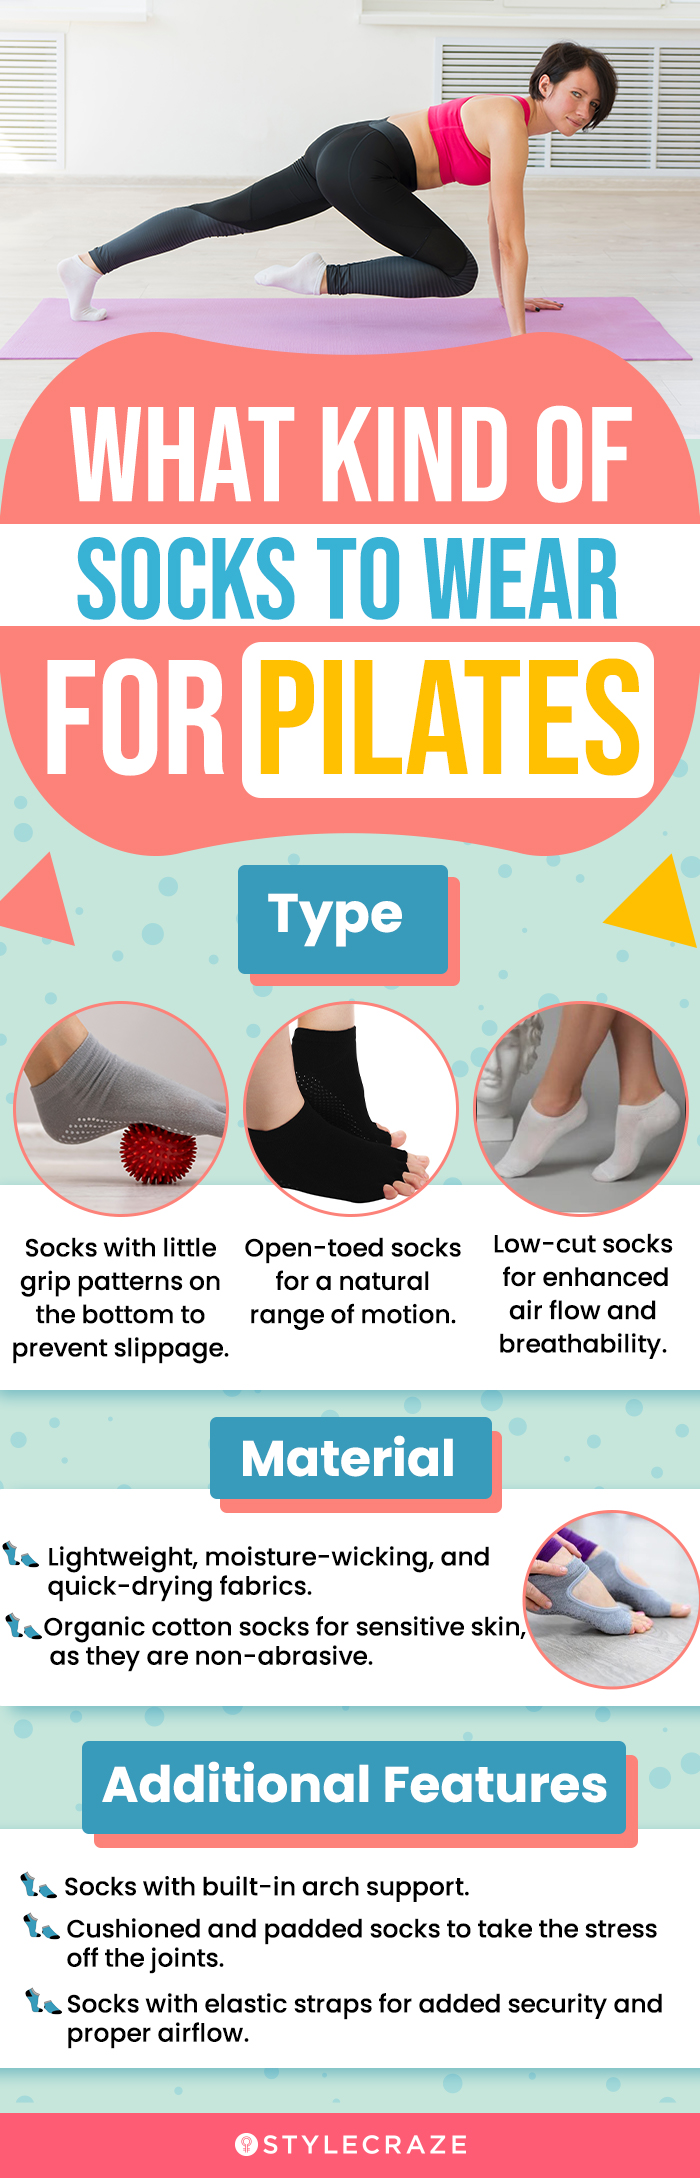 What Kind Of Socks To Wear For Pilates? (infographic)